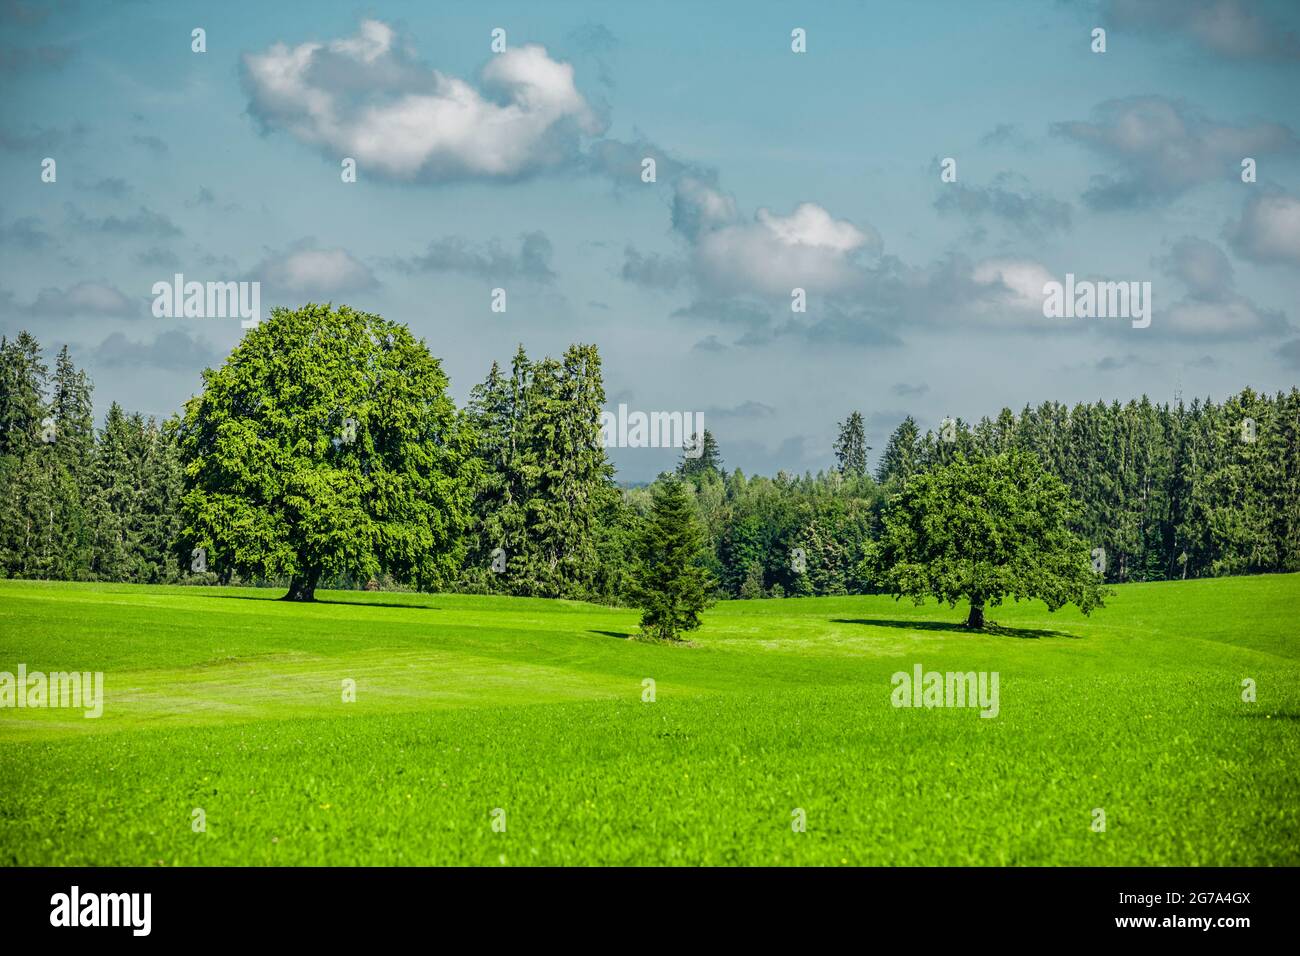 Green trees in the hilly landscape Stock Photo